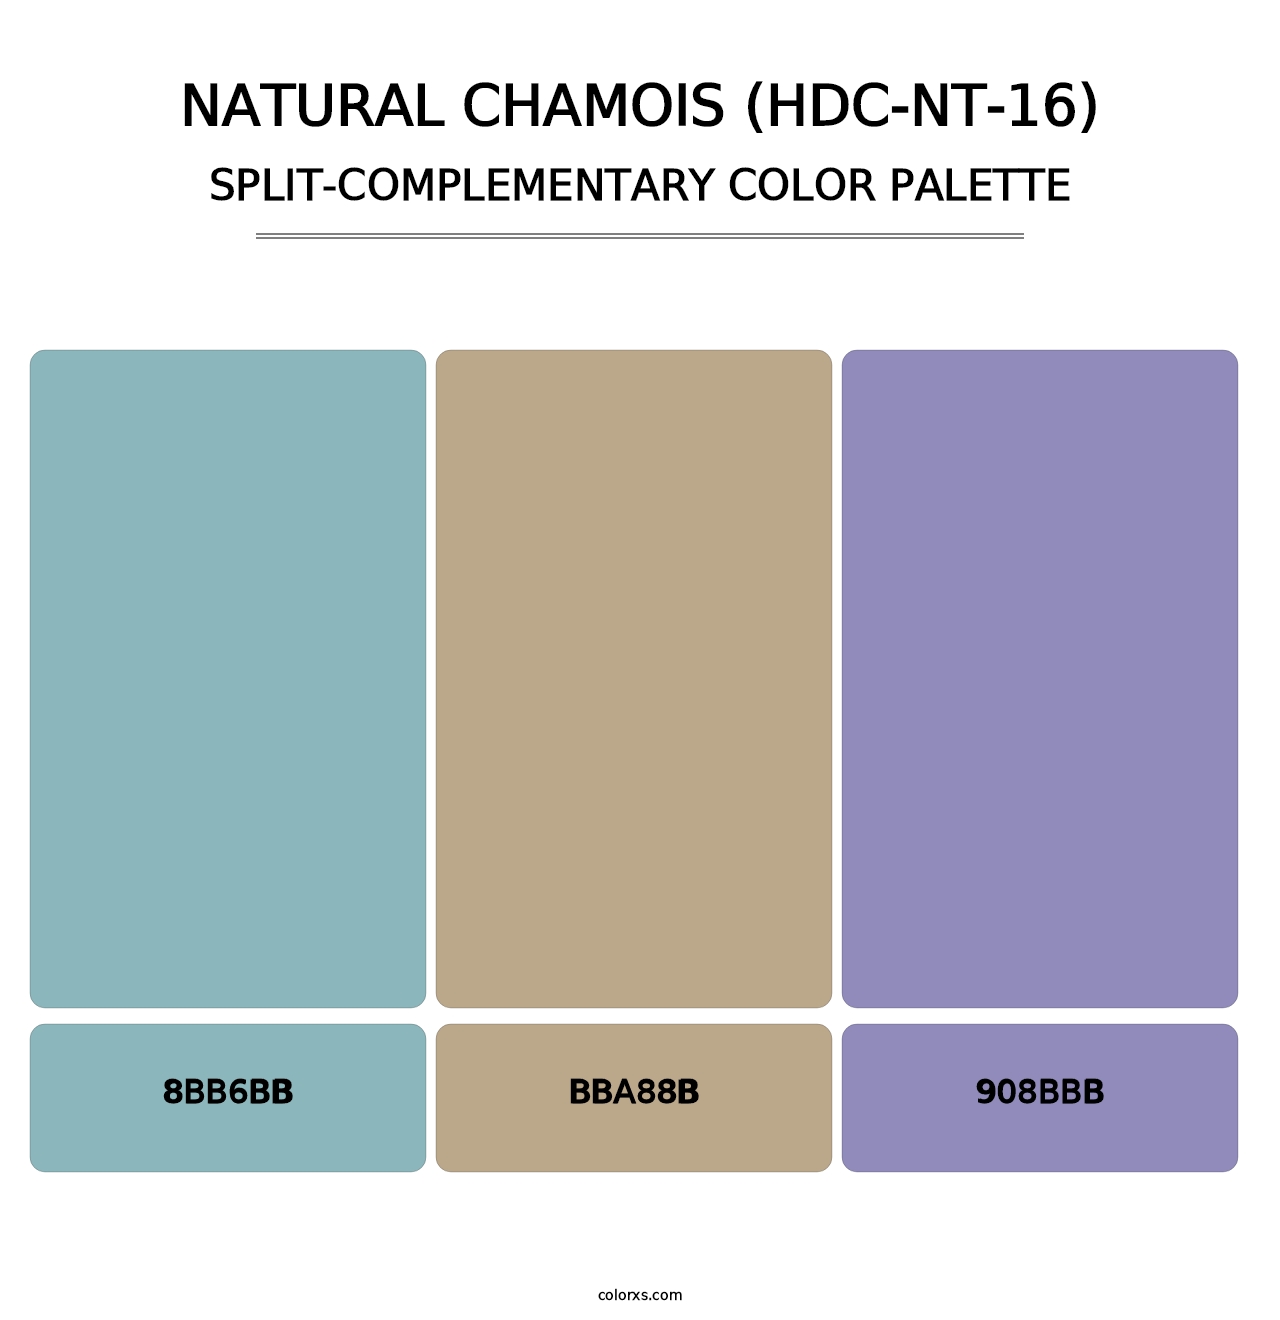 Natural Chamois (HDC-NT-16) - Split-Complementary Color Palette